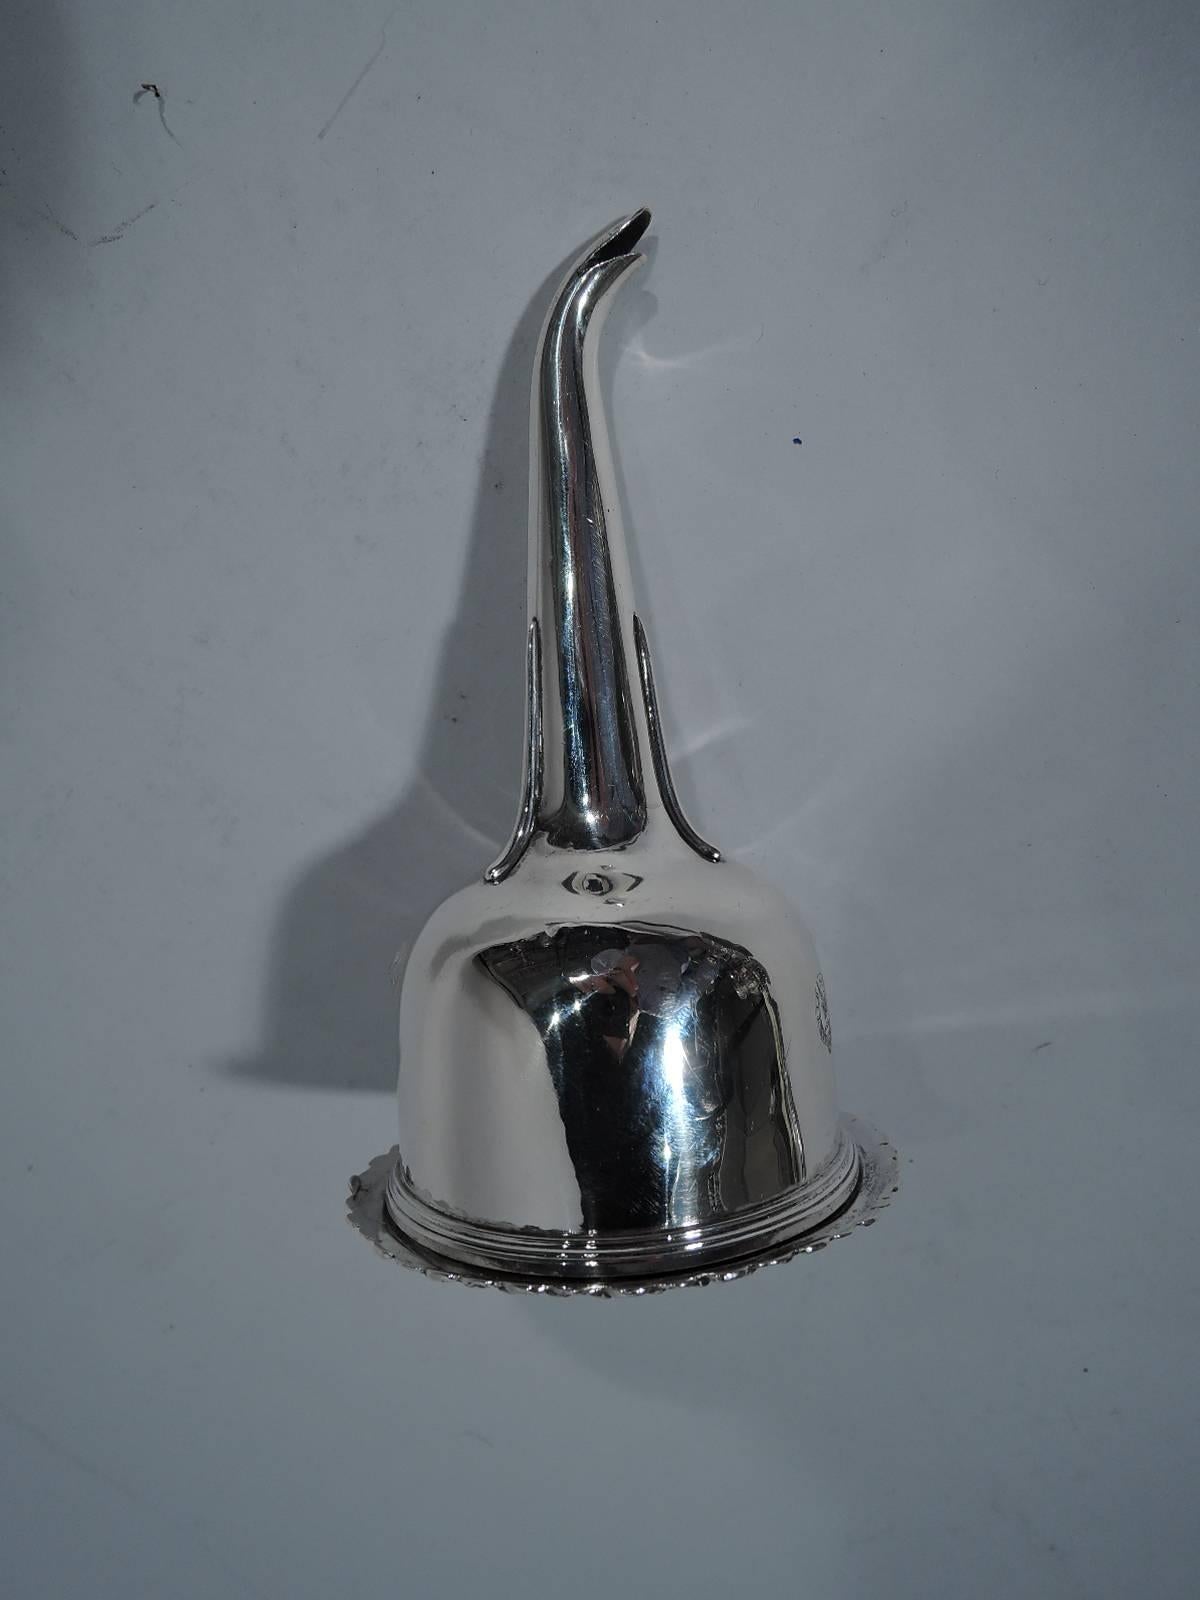 William IV silver wine funnel. Made John McKay in Edinburgh in 1835. Strainer has turned-down rim with worked leaf-and-dart border and pendant scallop shell, and is set in bowl with moulded rim and engraved armorial. Late Georgian design with